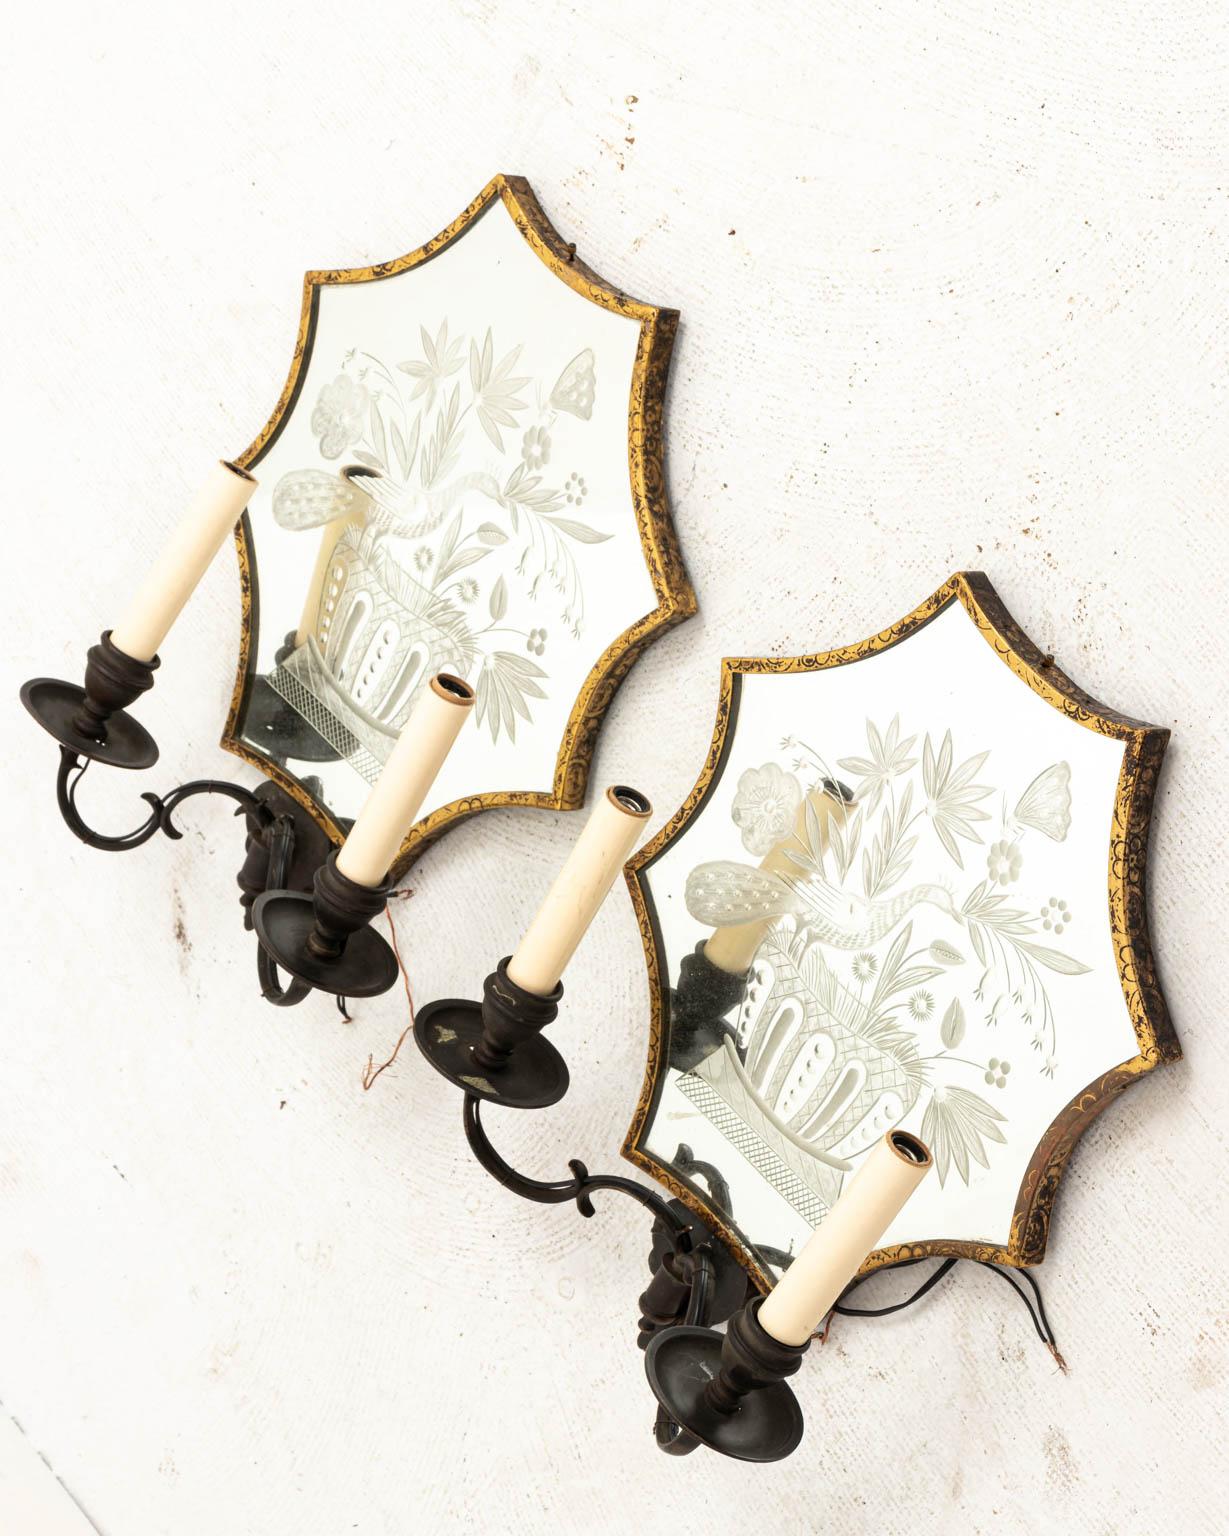 Pair of etched mirror sconces with birds, flowers, and butterfly motifs, circa 1990s. The piece also features oil rubbed bronzed metal and two arm lights. Wired. Please note of wear consistent with age including patina and oxidation to the metal